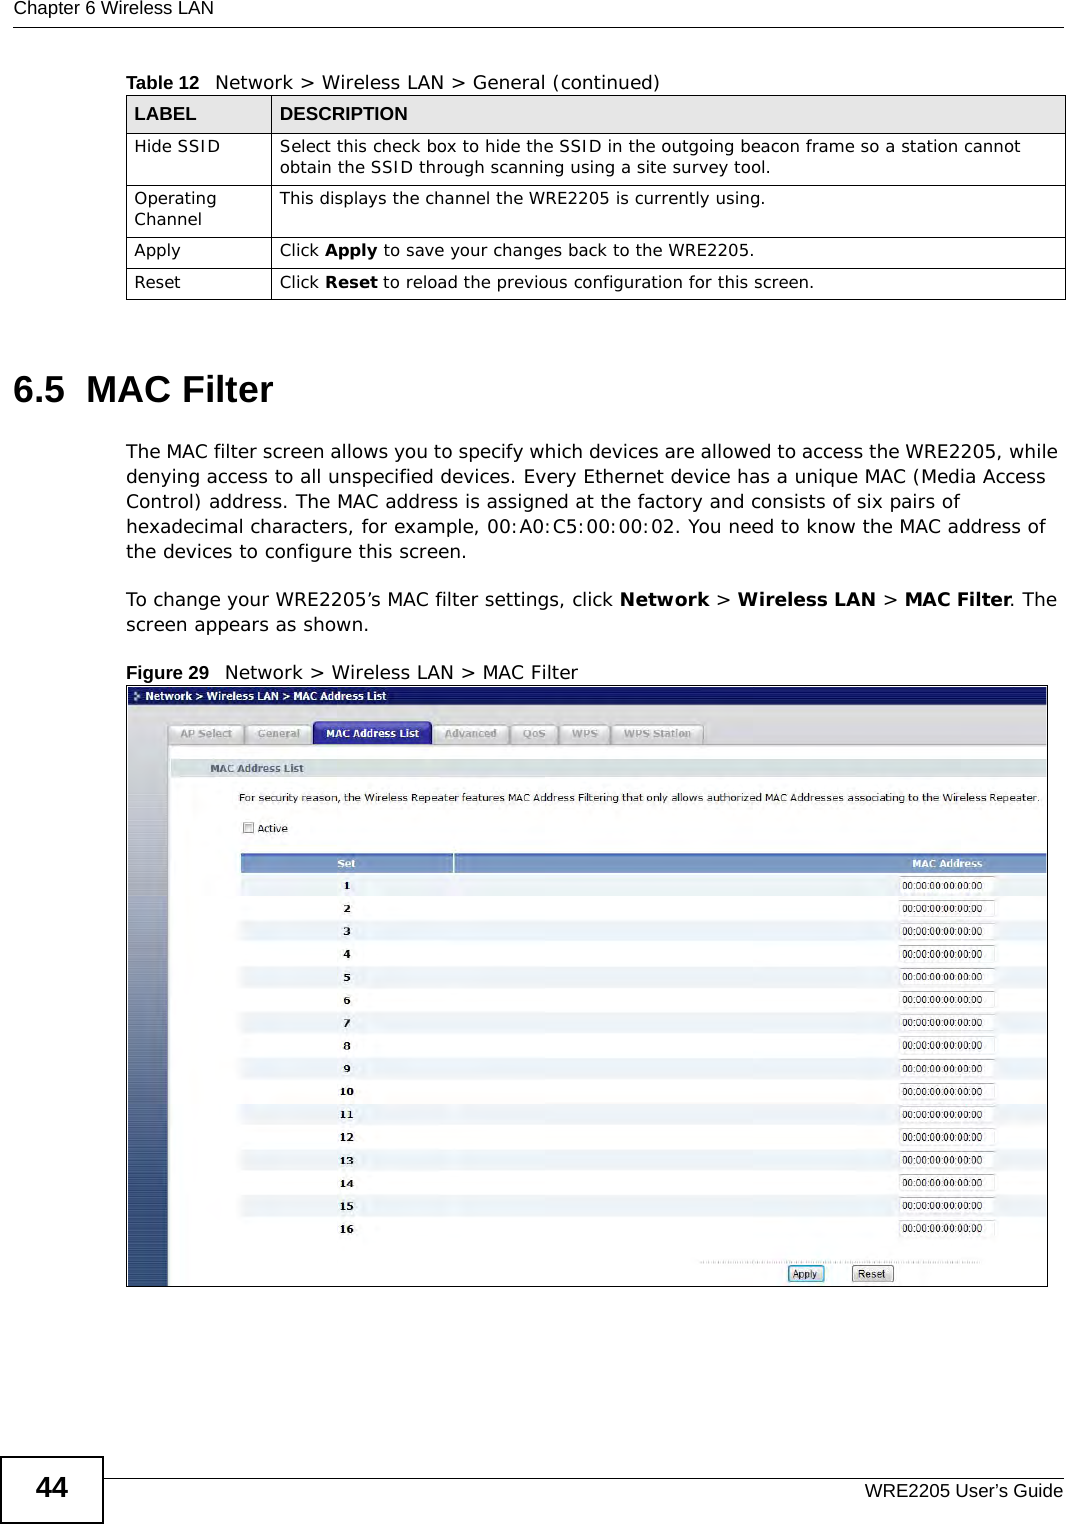 Chapter 6 Wireless LANWRE2205 User’s Guide446.5  MAC FilterThe MAC filter screen allows you to specify which devices are allowed to access the WRE2205, while denying access to all unspecified devices. Every Ethernet device has a unique MAC (Media Access Control) address. The MAC address is assigned at the factory and consists of six pairs of hexadecimal characters, for example, 00:A0:C5:00:00:02. You need to know the MAC address of the devices to configure this screen.To change your WRE2205’s MAC filter settings, click Network &gt; Wireless LAN &gt; MAC Filter. The screen appears as shown.Figure 29   Network &gt; Wireless LAN &gt; MAC FilterHide SSID Select this check box to hide the SSID in the outgoing beacon frame so a station cannot obtain the SSID through scanning using a site survey tool.Operating Channel  This displays the channel the WRE2205 is currently using.Apply Click Apply to save your changes back to the WRE2205.Reset Click Reset to reload the previous configuration for this screen.Table 12   Network &gt; Wireless LAN &gt; General (continued)LABEL DESCRIPTION